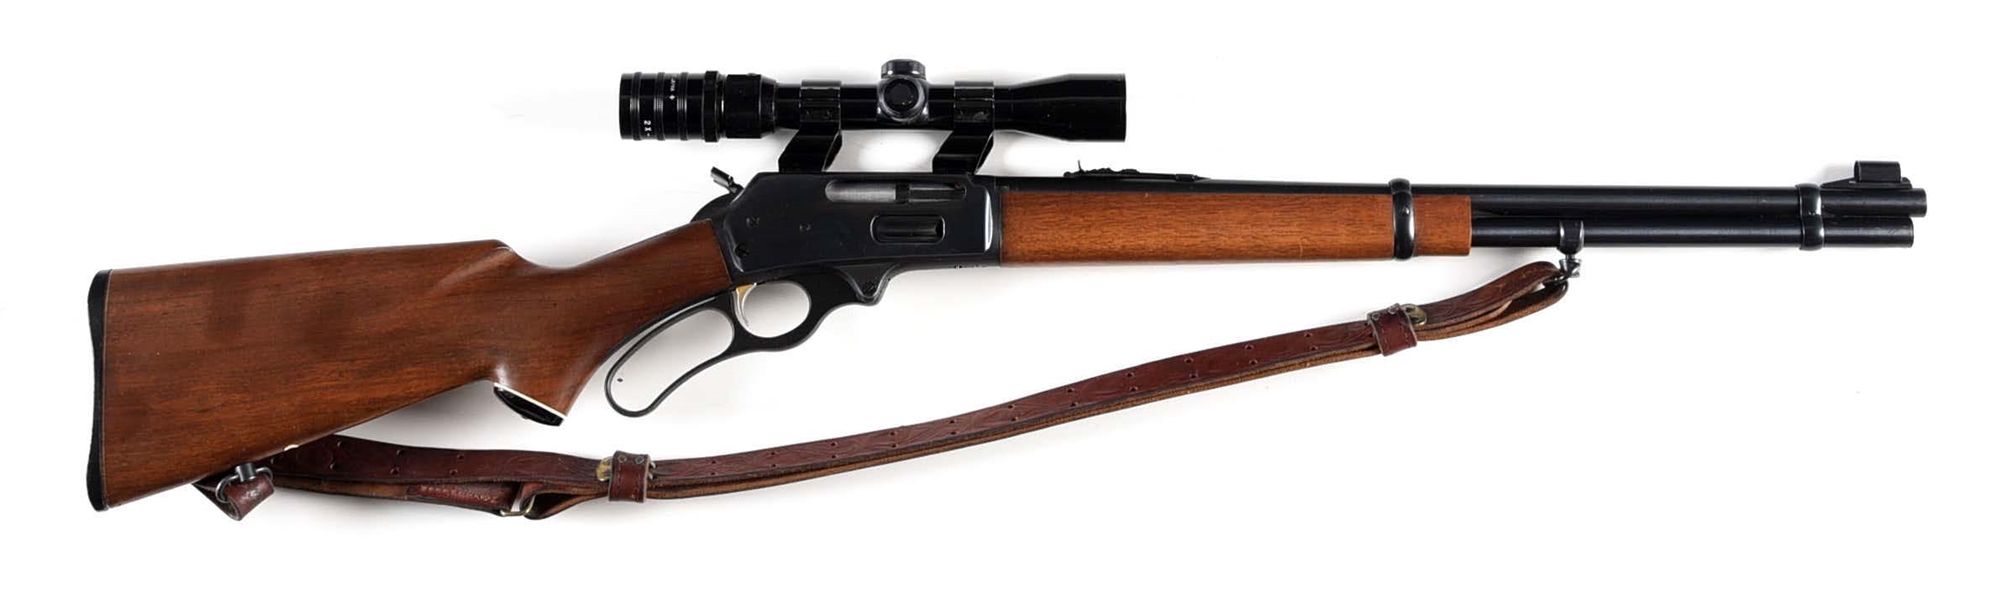 (M) MARLIN 336 LEVER ACTION CARBINE IN .35 REMINGTON.